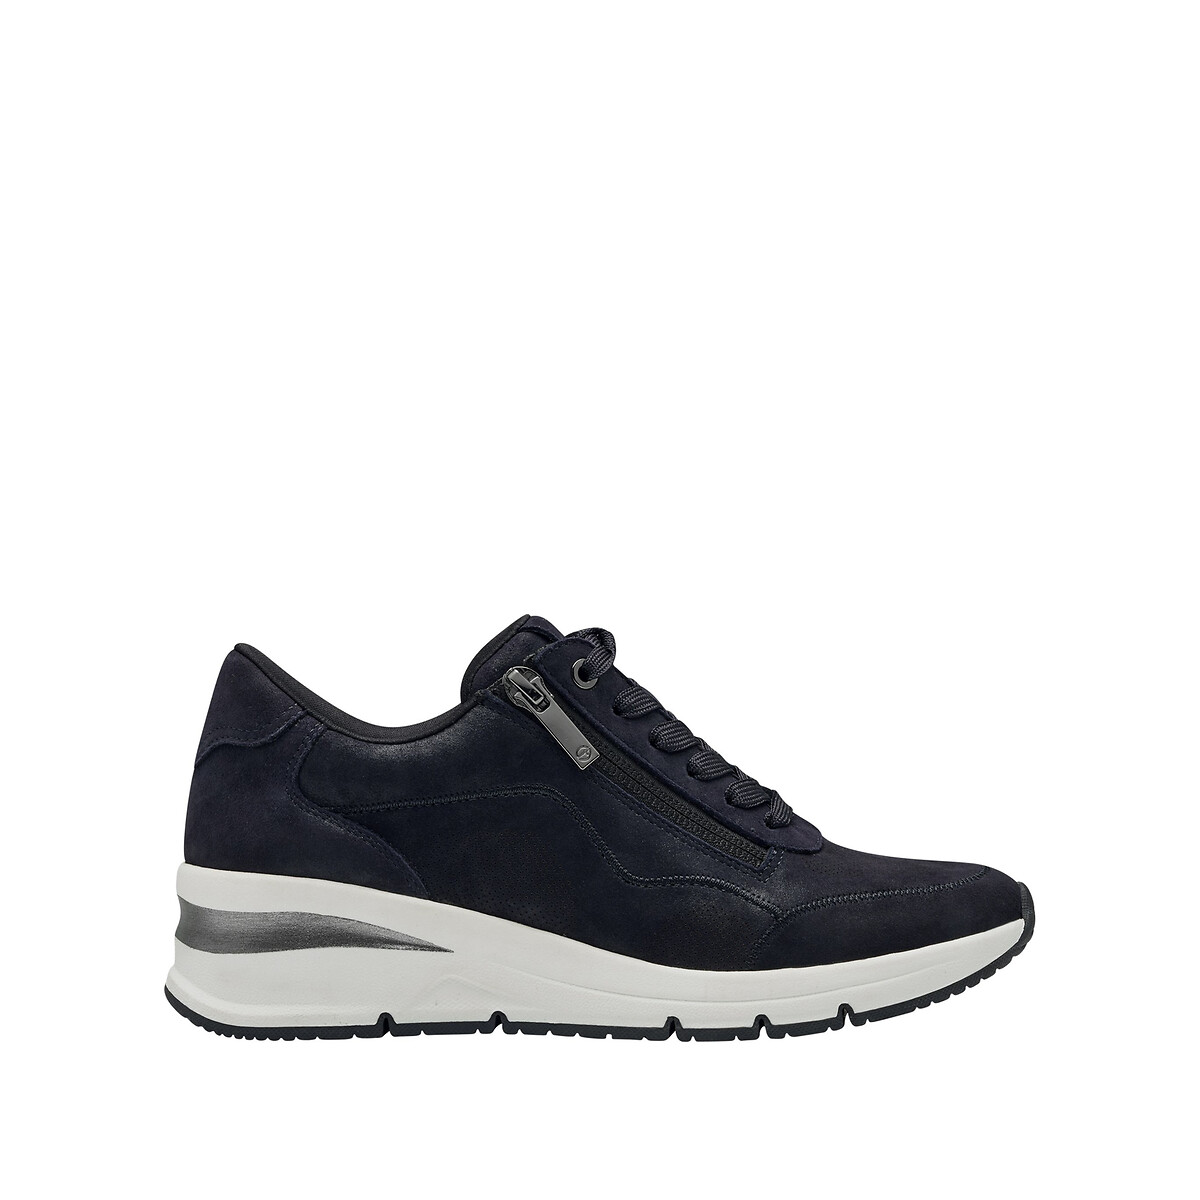 Leather wedge zipped trainers, navy blue, Tamaris | La Redoute